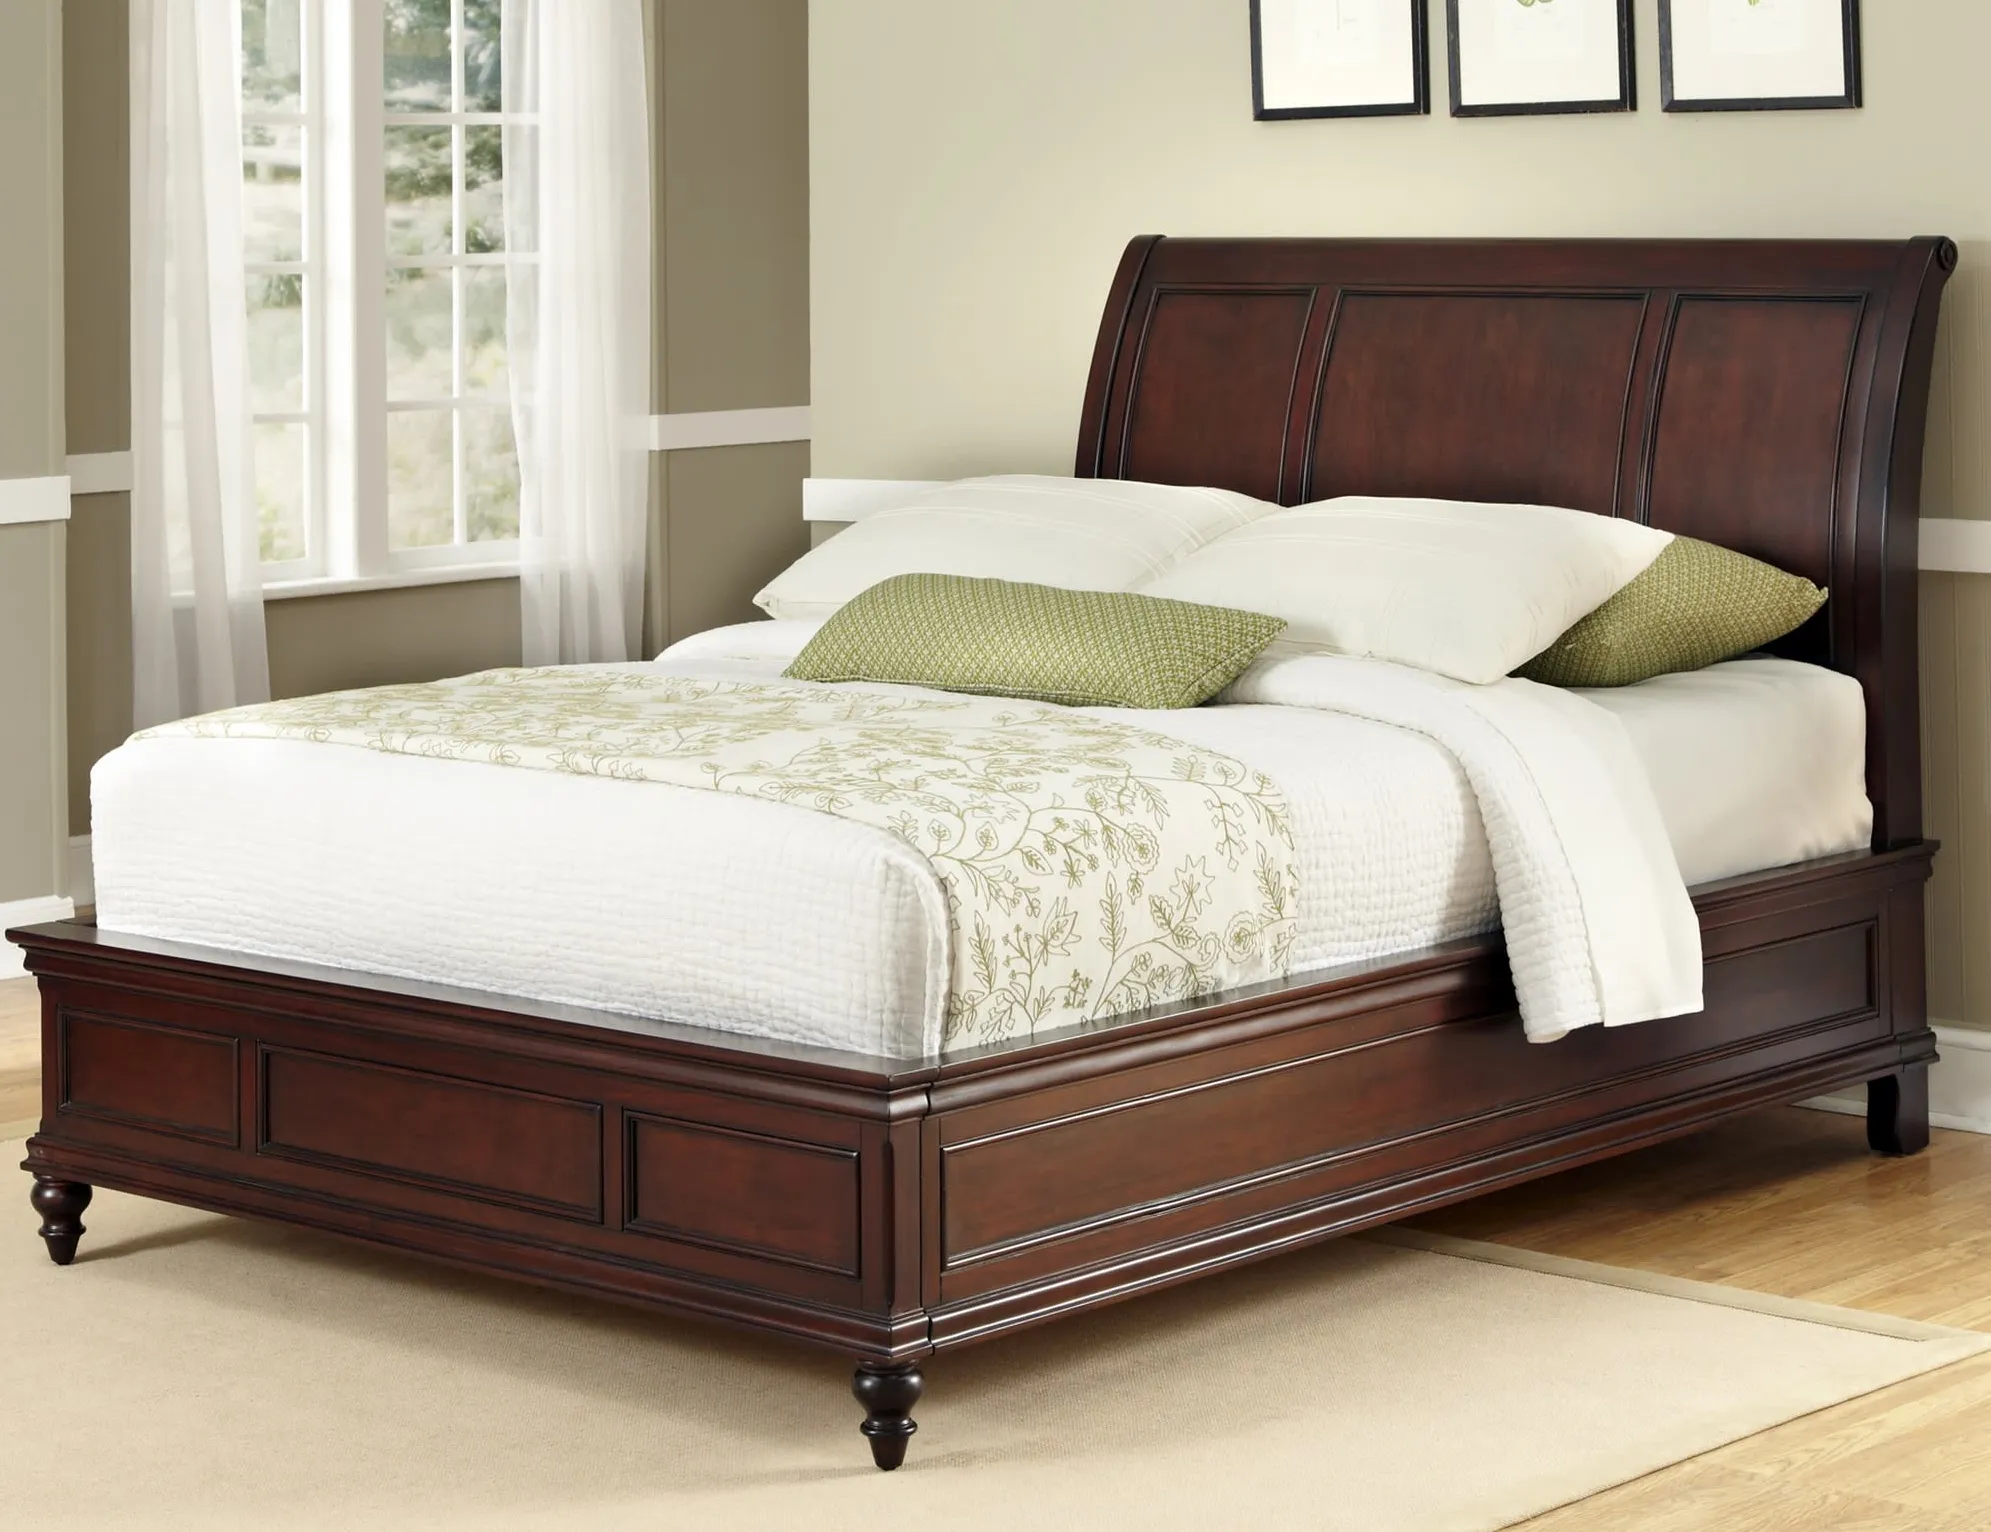 homestyles® Lafayette Brown King Sleigh Bed